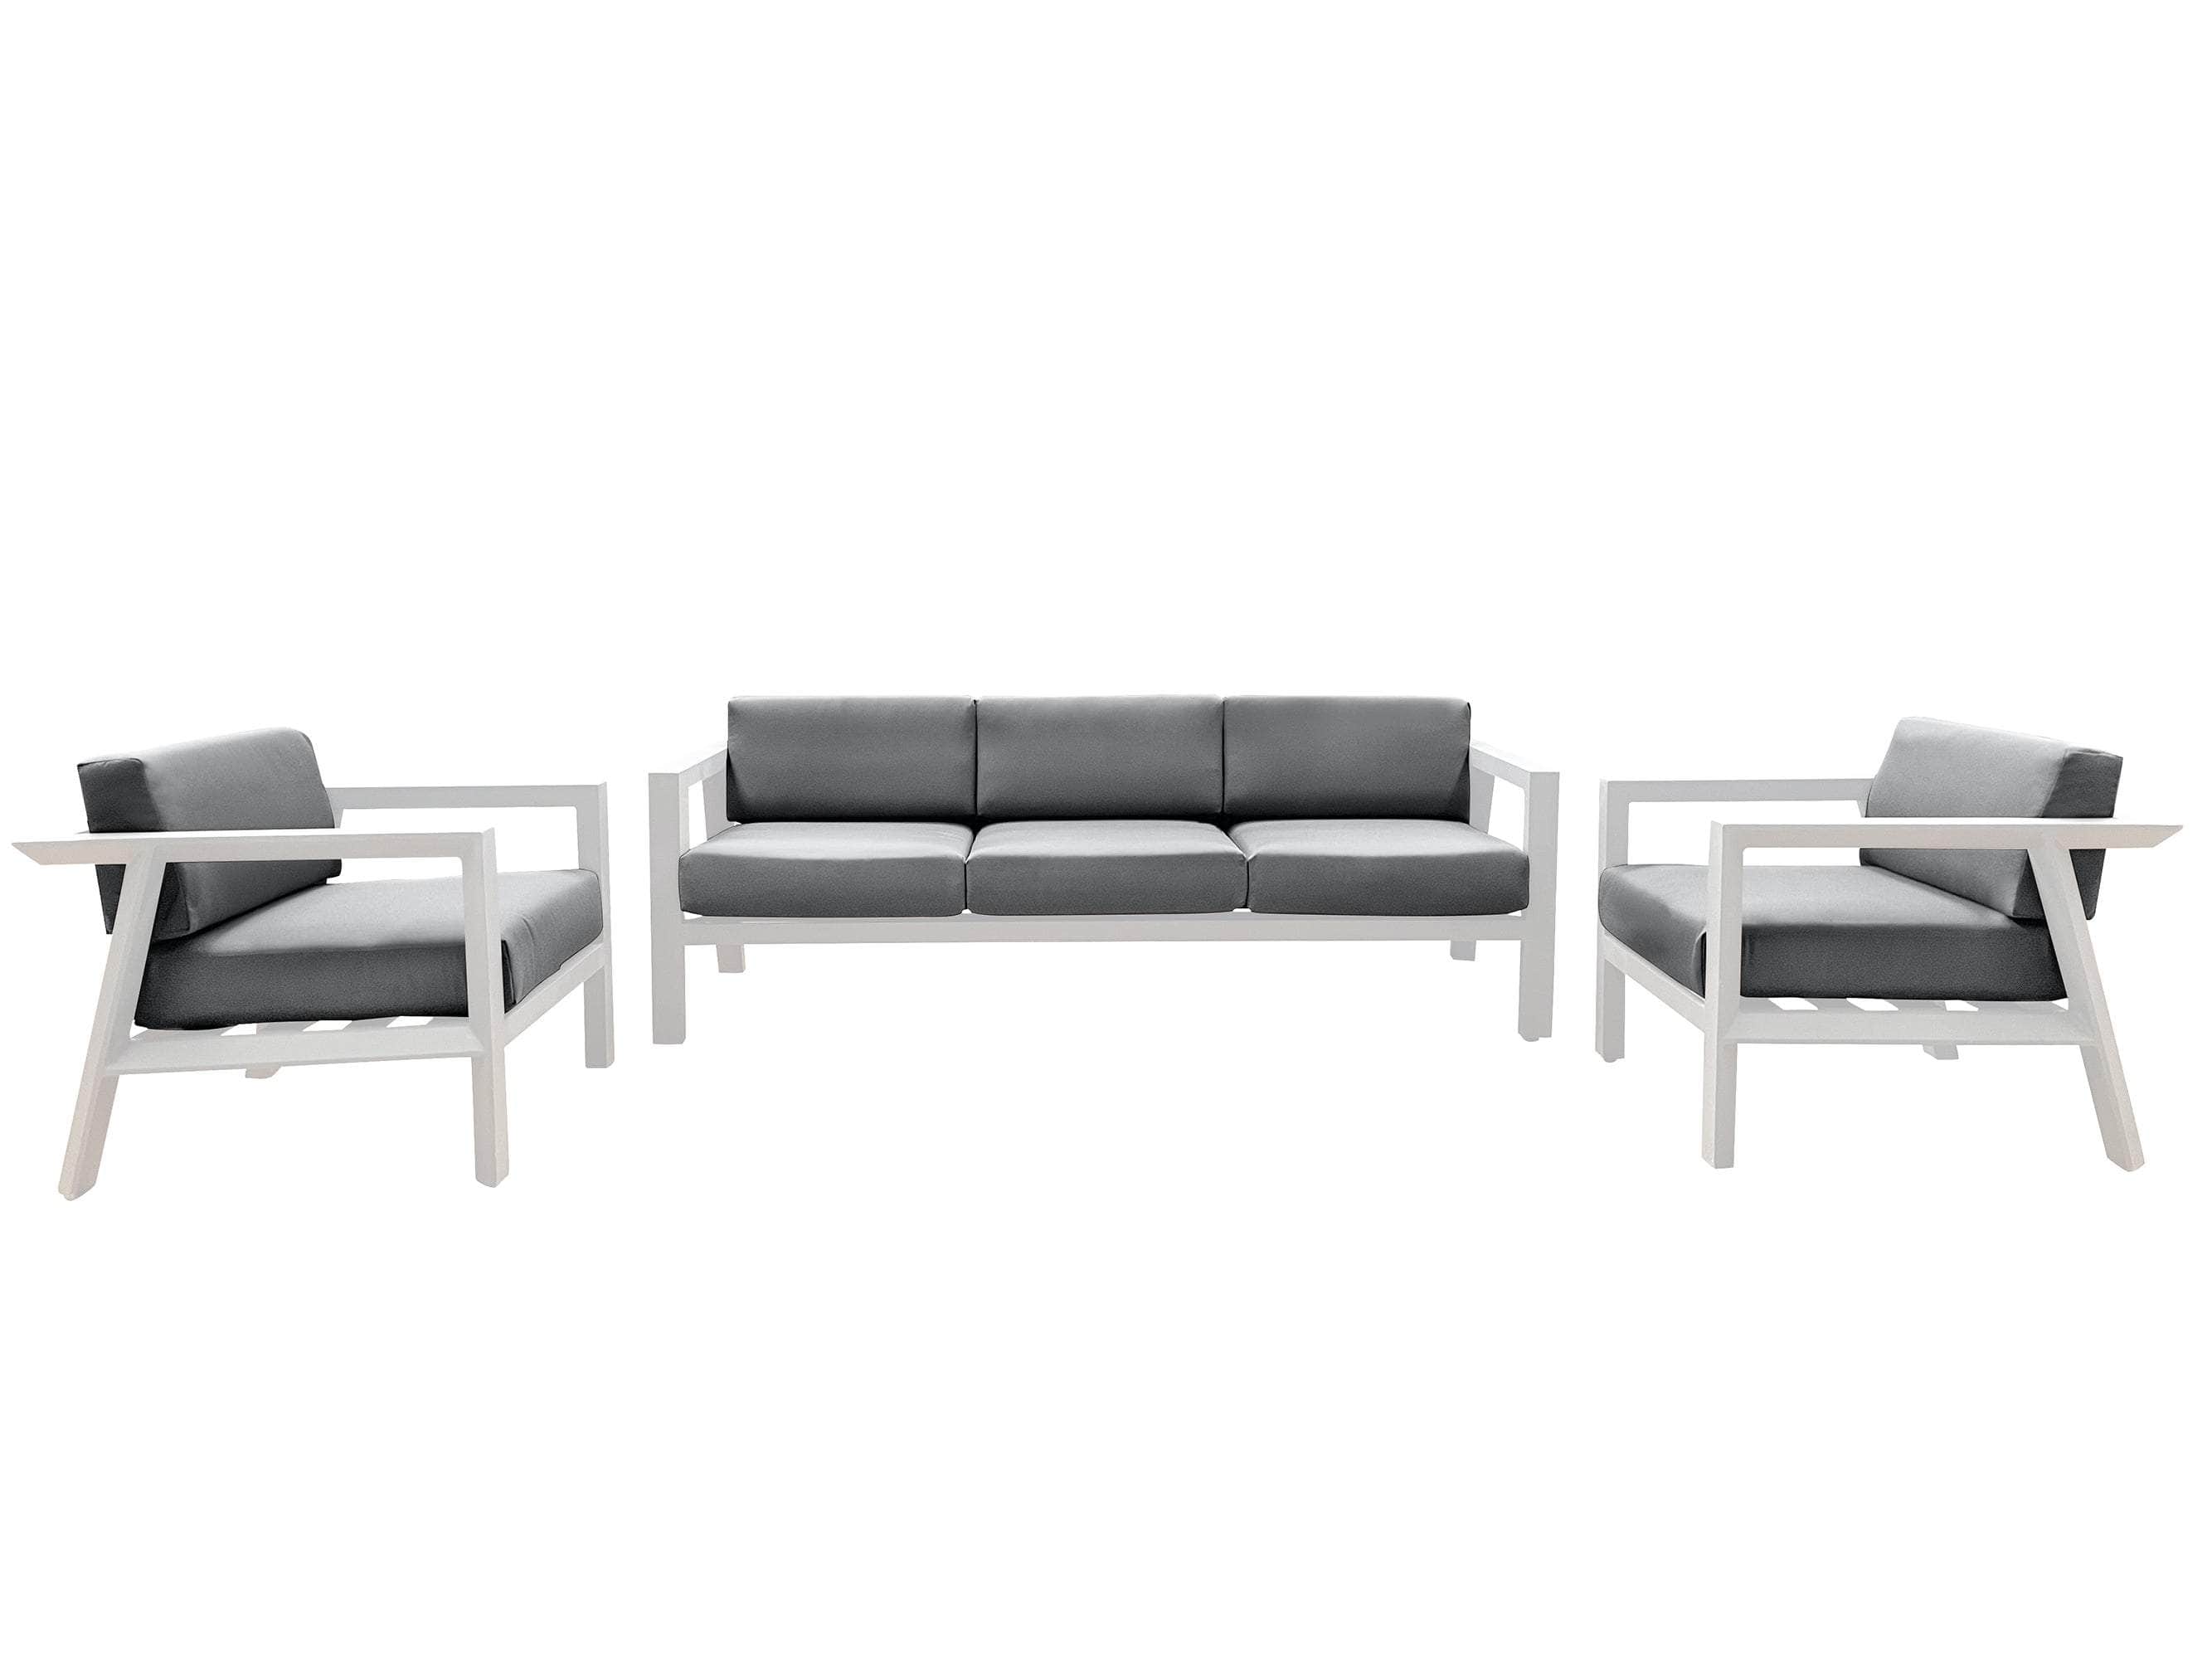 CIEUX Sofa Set Canvas Charcoal Corsica Outdoor Patio Aluminum Metal Sofa Conversation Set in White with Sunbrella Cushions - Available in 2 Colours